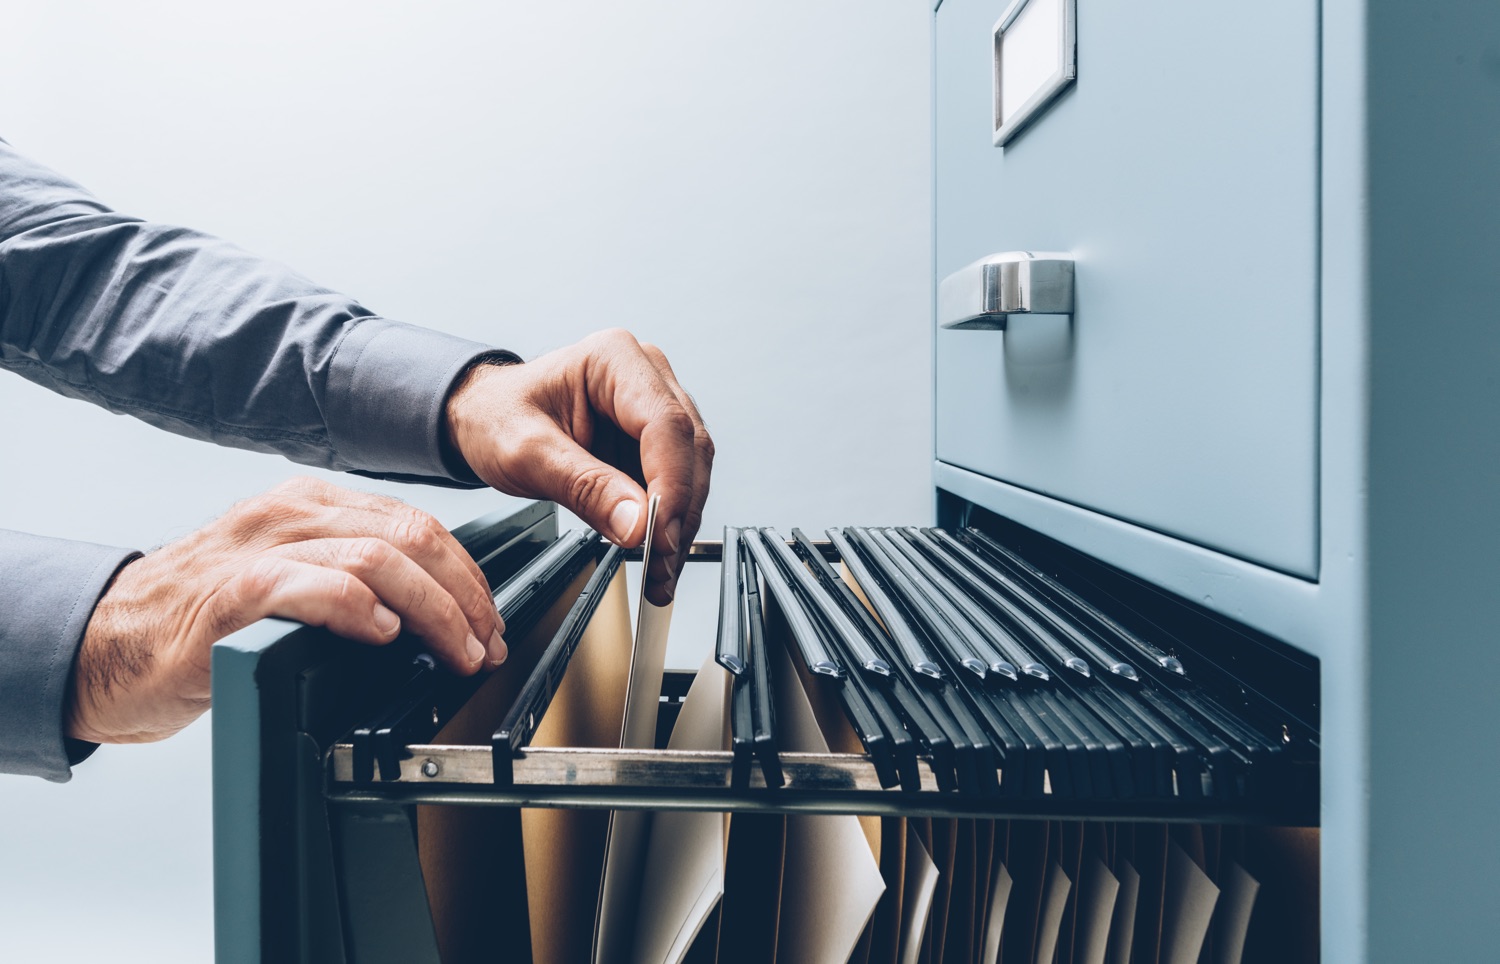 Archiving and Records Management